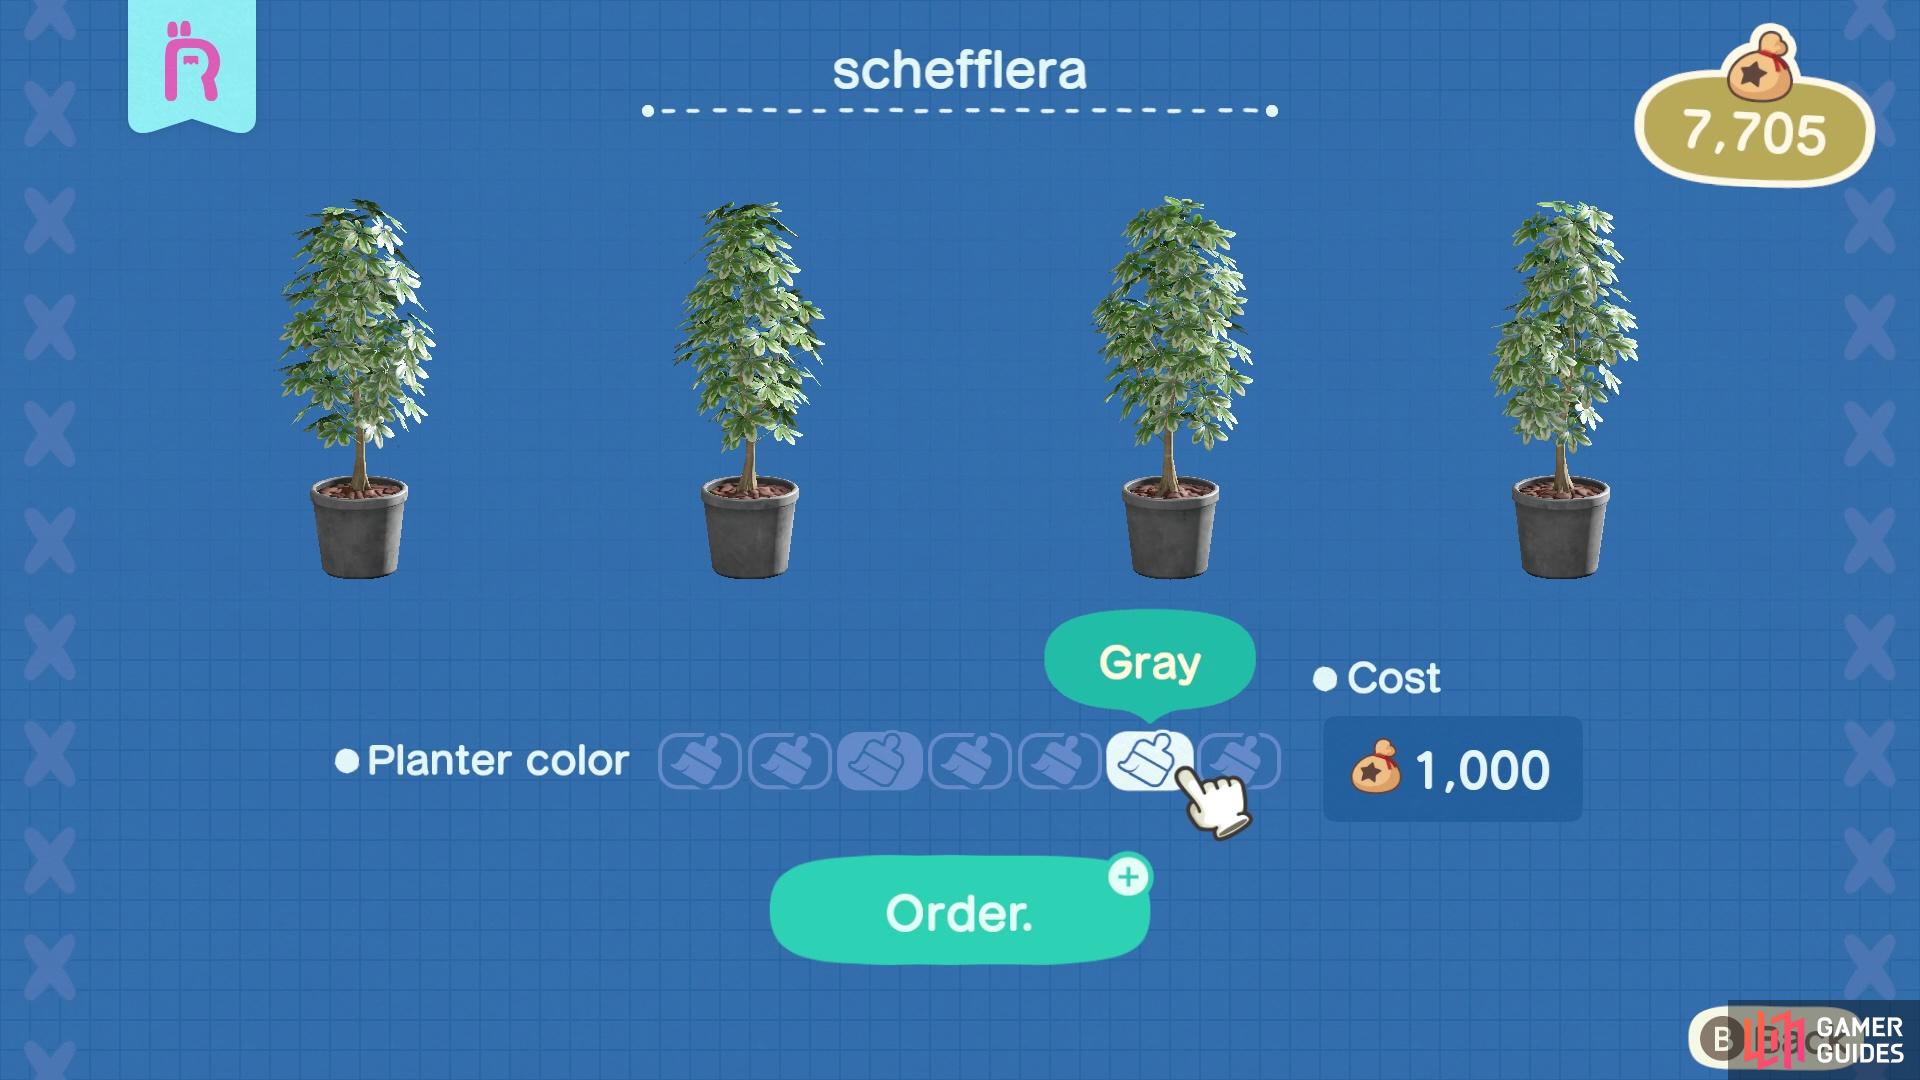 You can even customize plants!